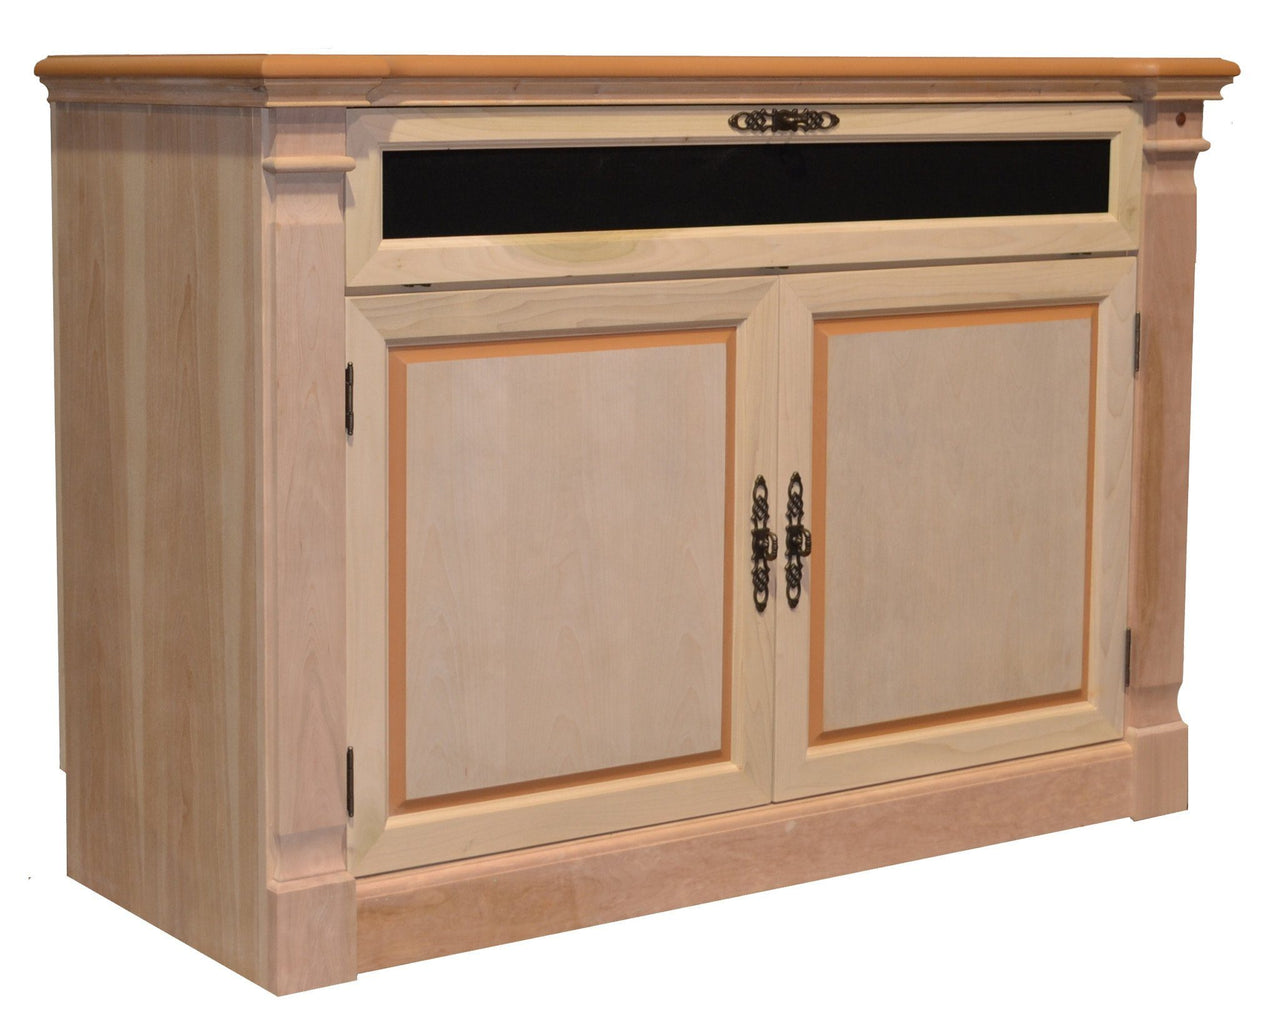 Touchstone Adonzo Unfinished Full Size Lift Cabinets For Up To 60” Flat Screen Tv’S Tv Lift Cabinets Touchstone 